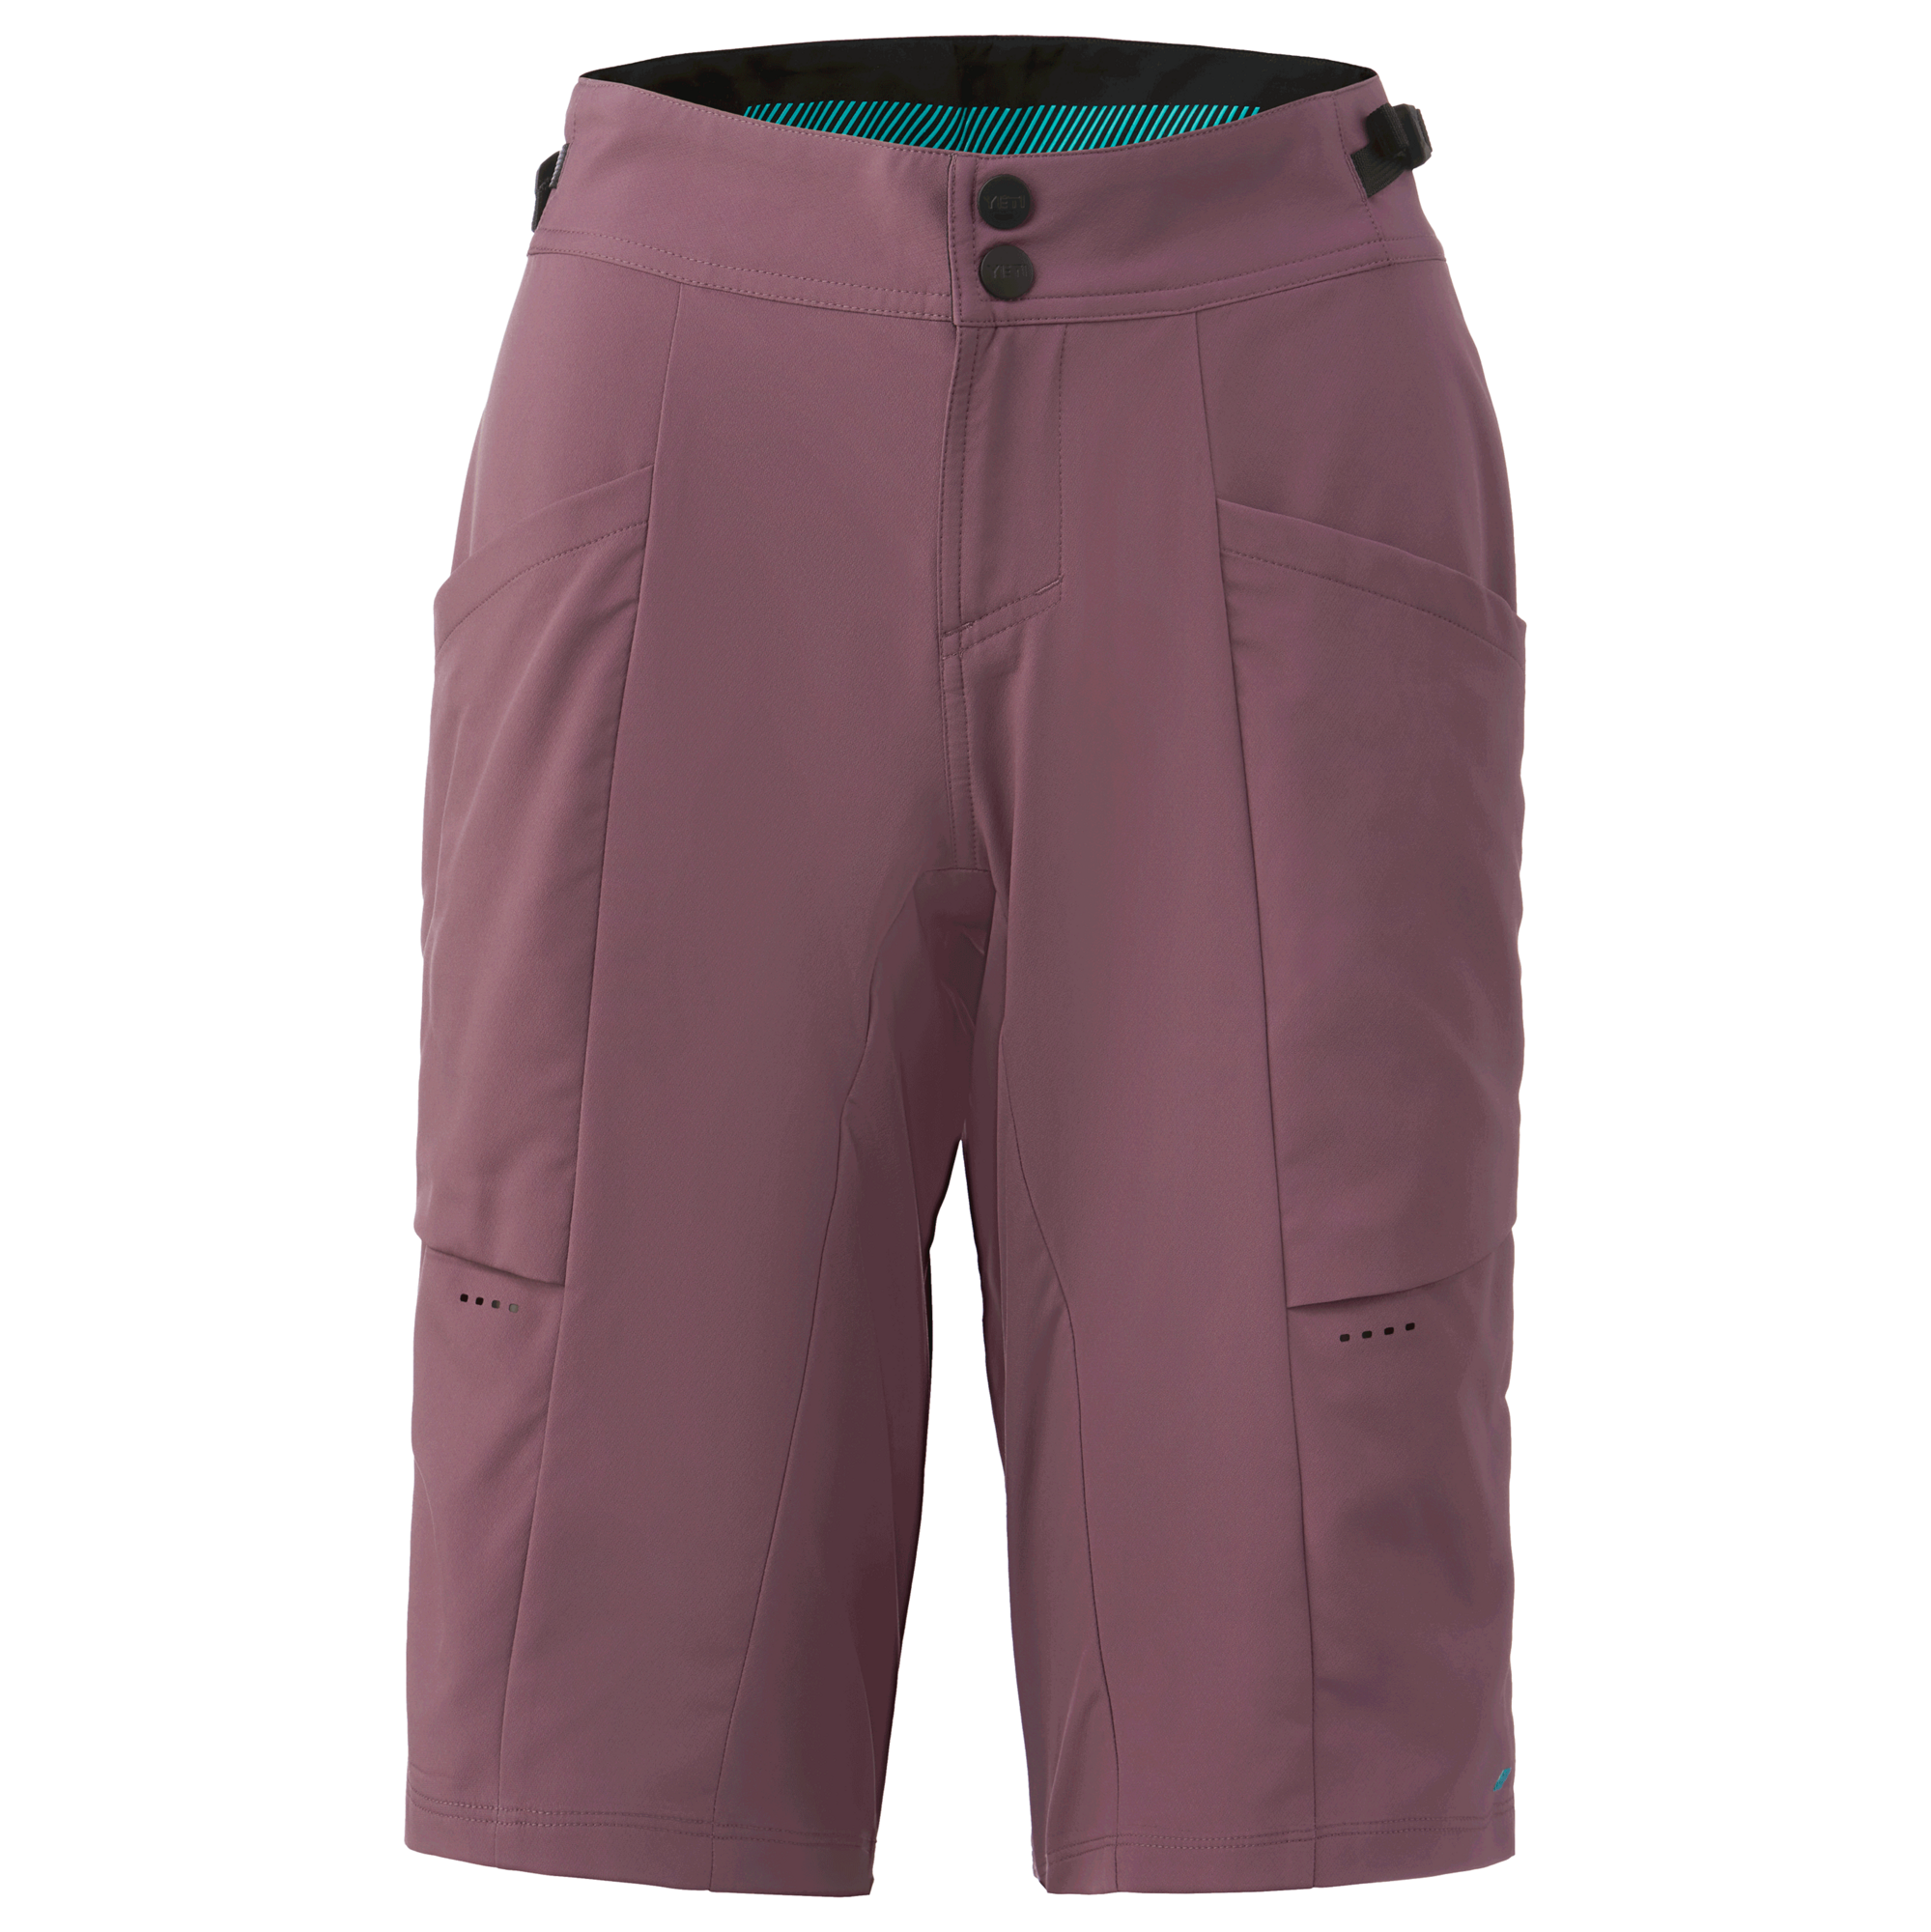 https://www.sefiles.net/images/library/zoom/yeti-cycles-women's-norrie-short--455380-3355595-2.png